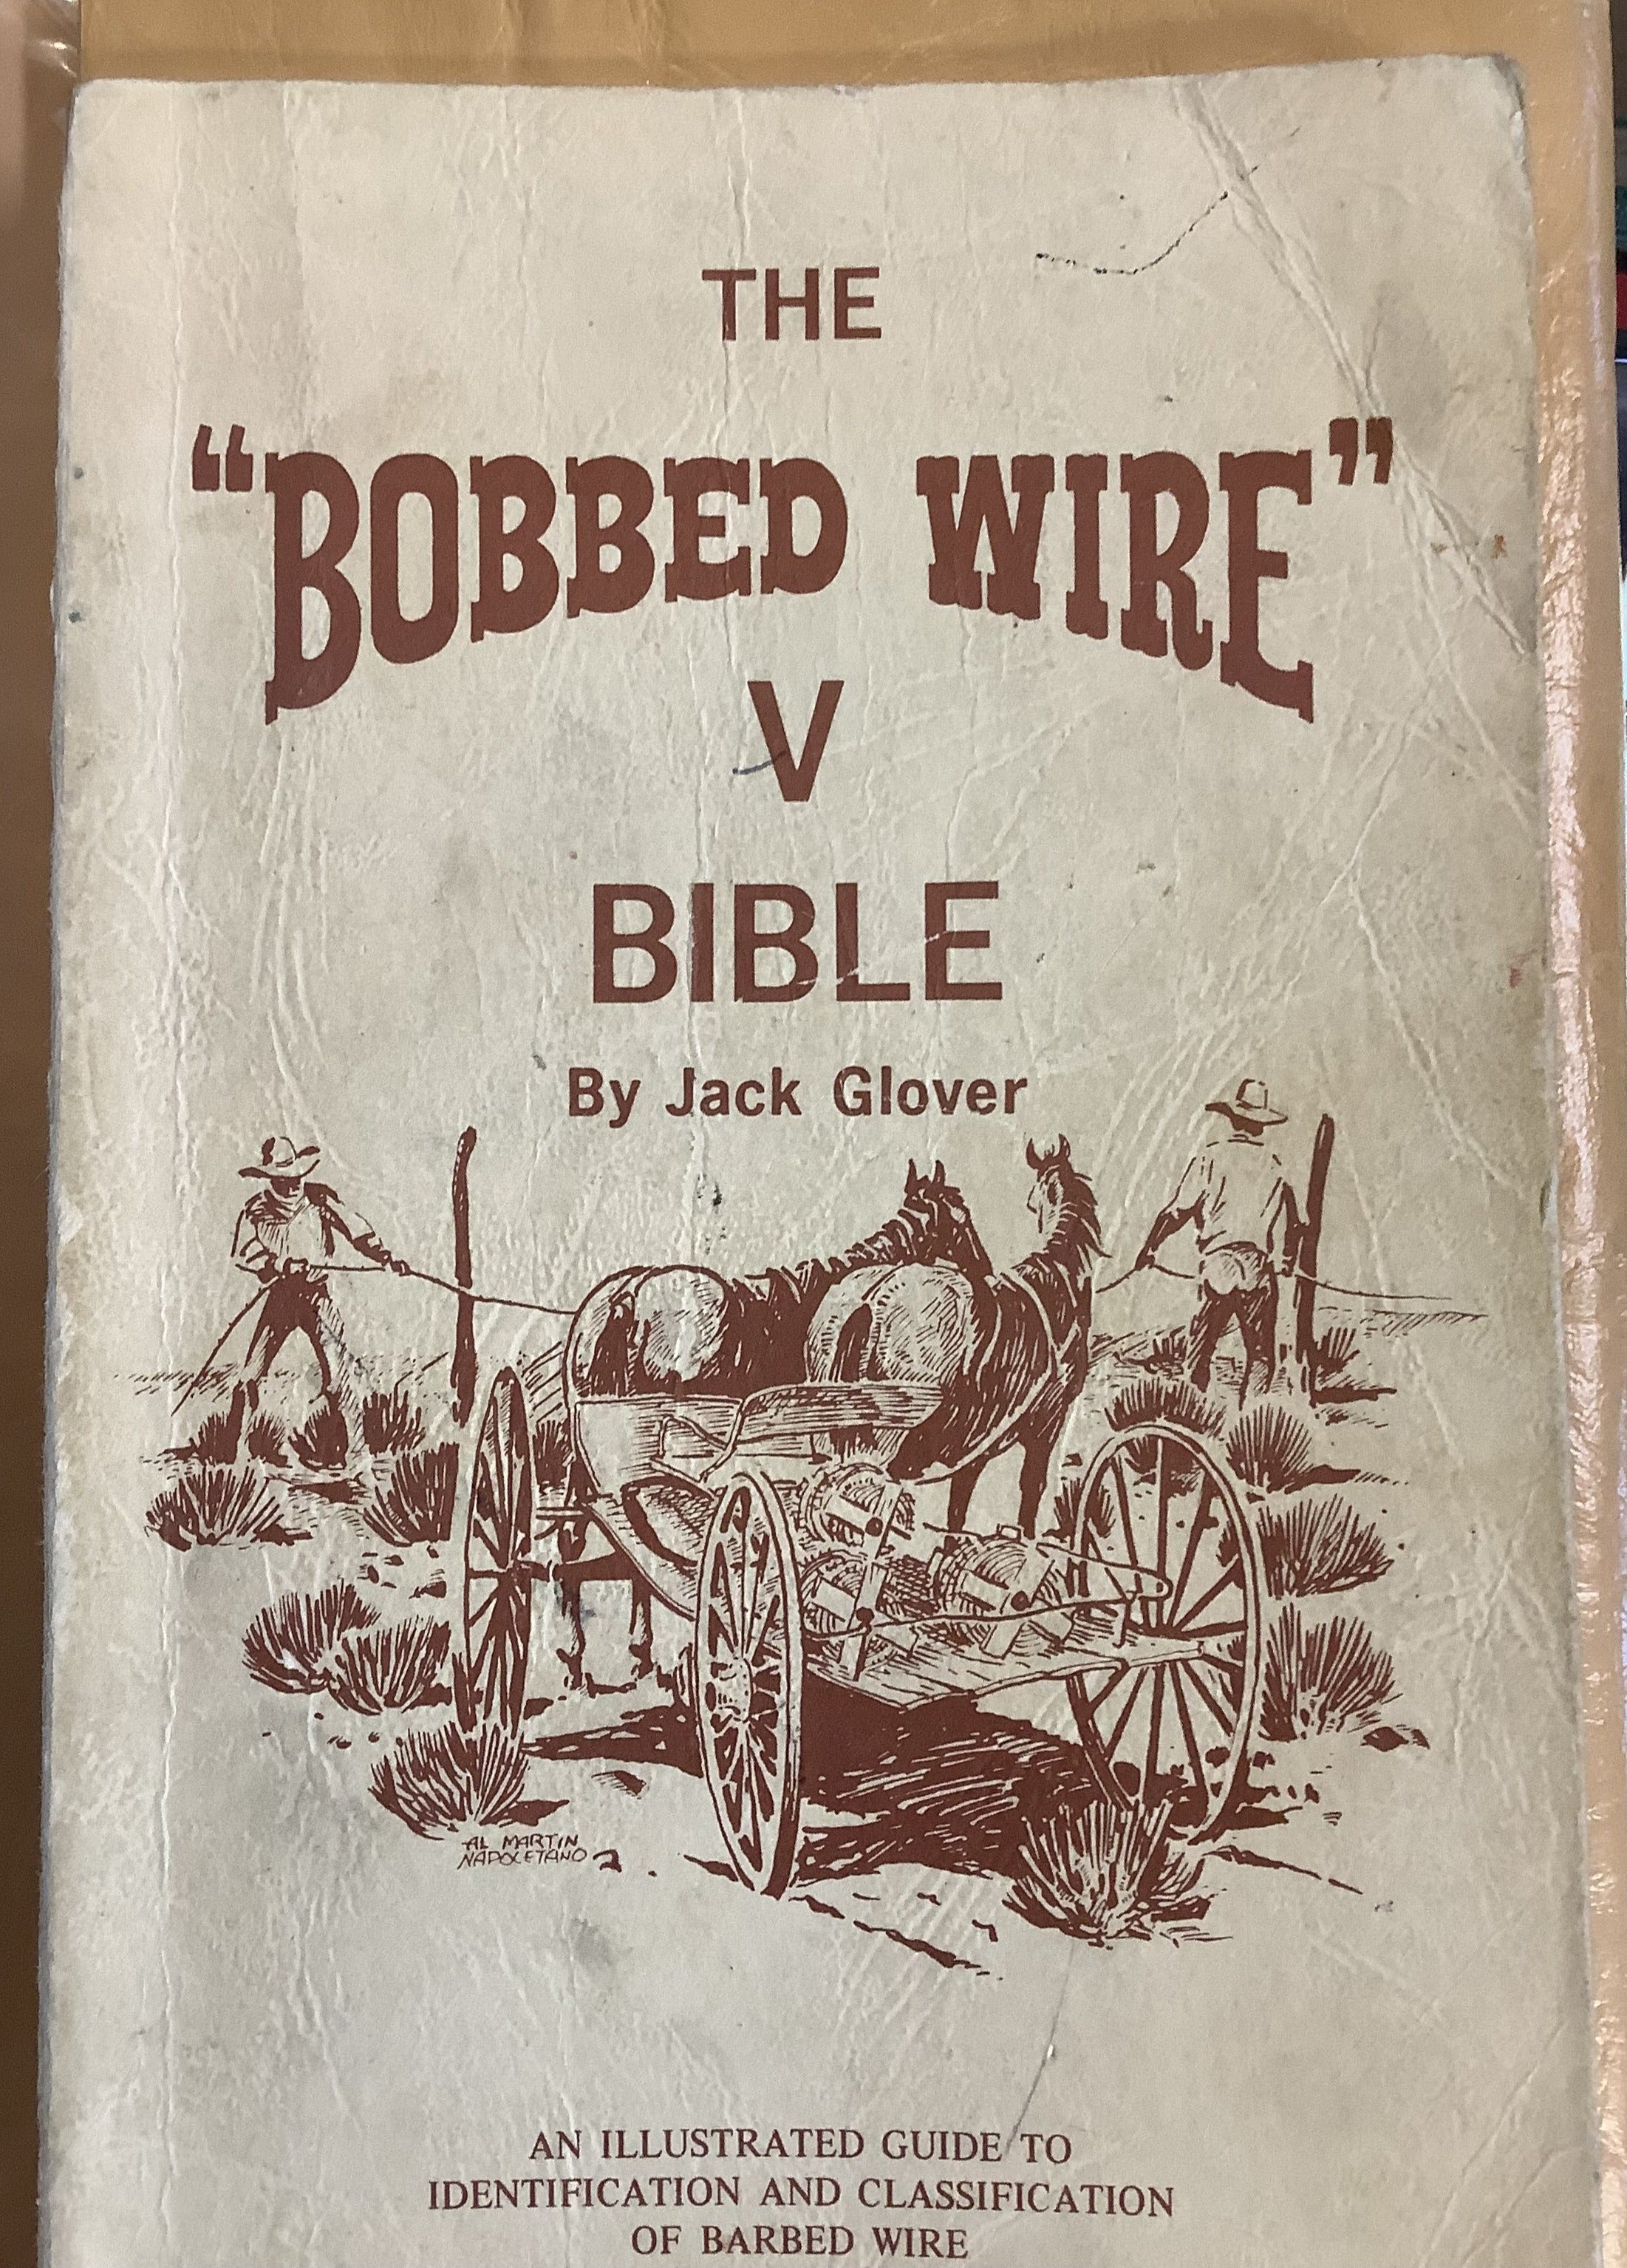 BOOKS - "Bobbed Wire Bible" series ... Jack Glover publications